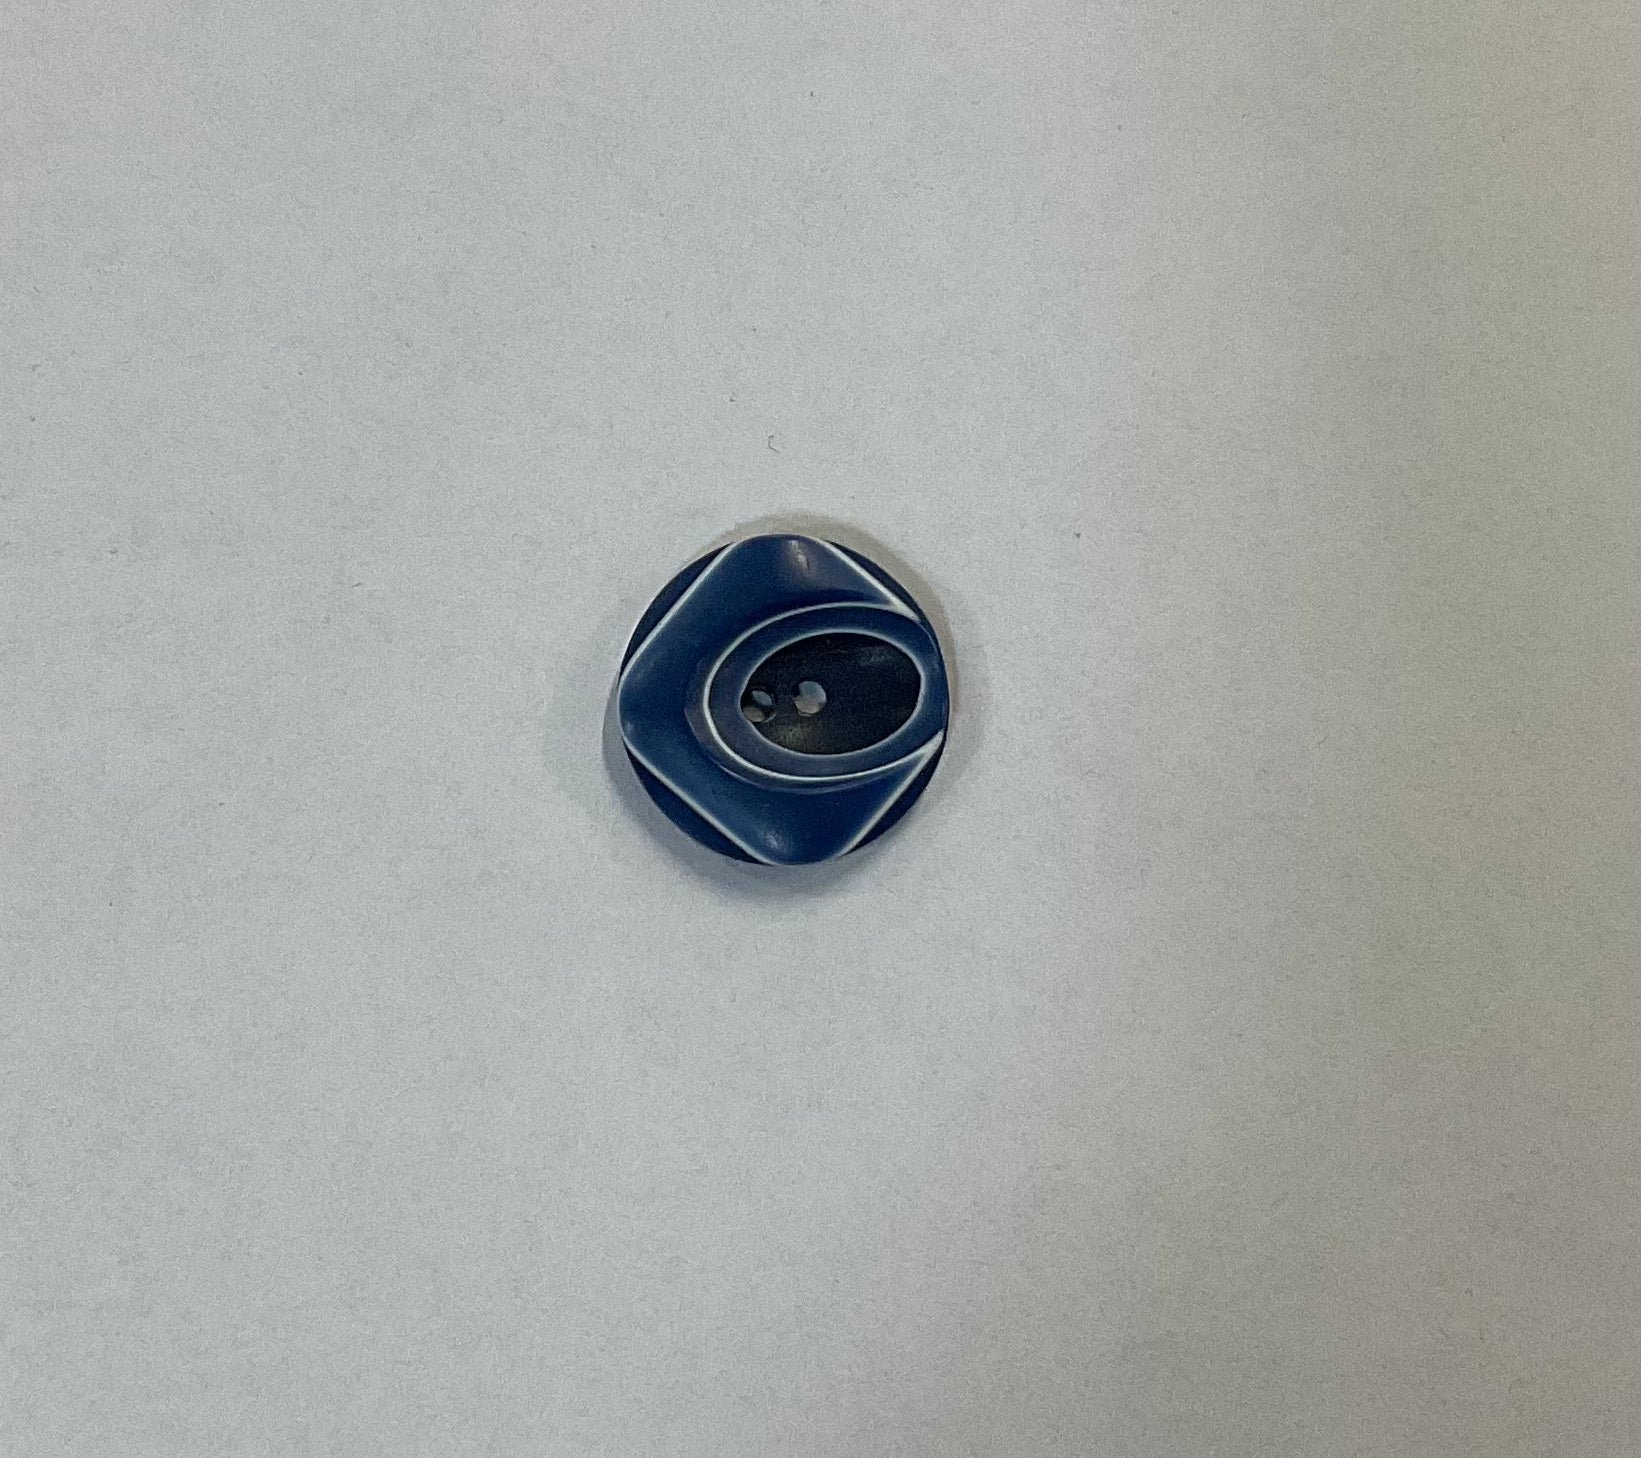 25mm Navy and White 2 holed marbled button